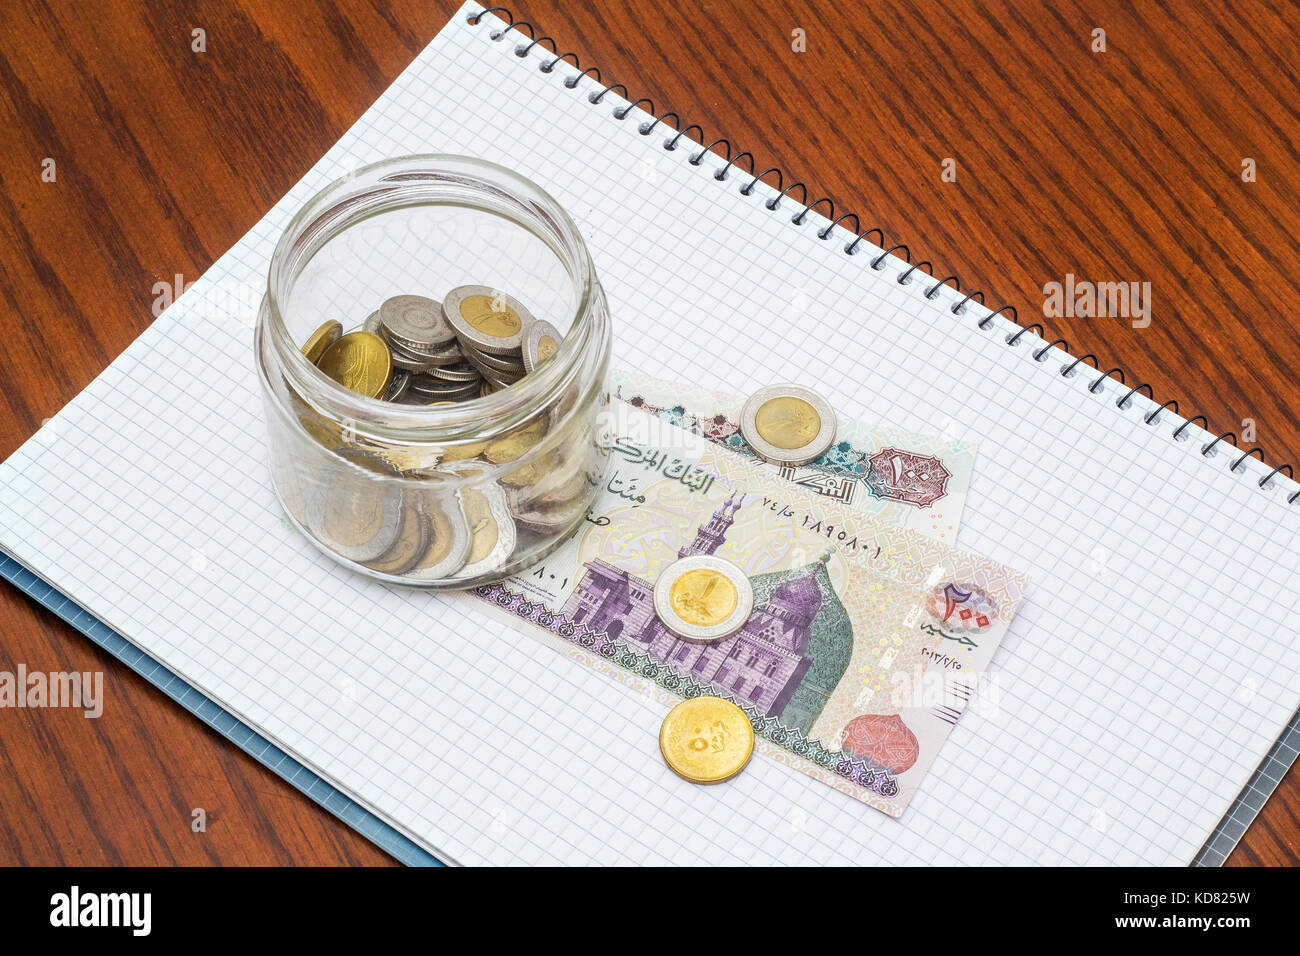 Glass Full of Coins on Banknotes with Notebook, on Wooden Desk Stock Photo